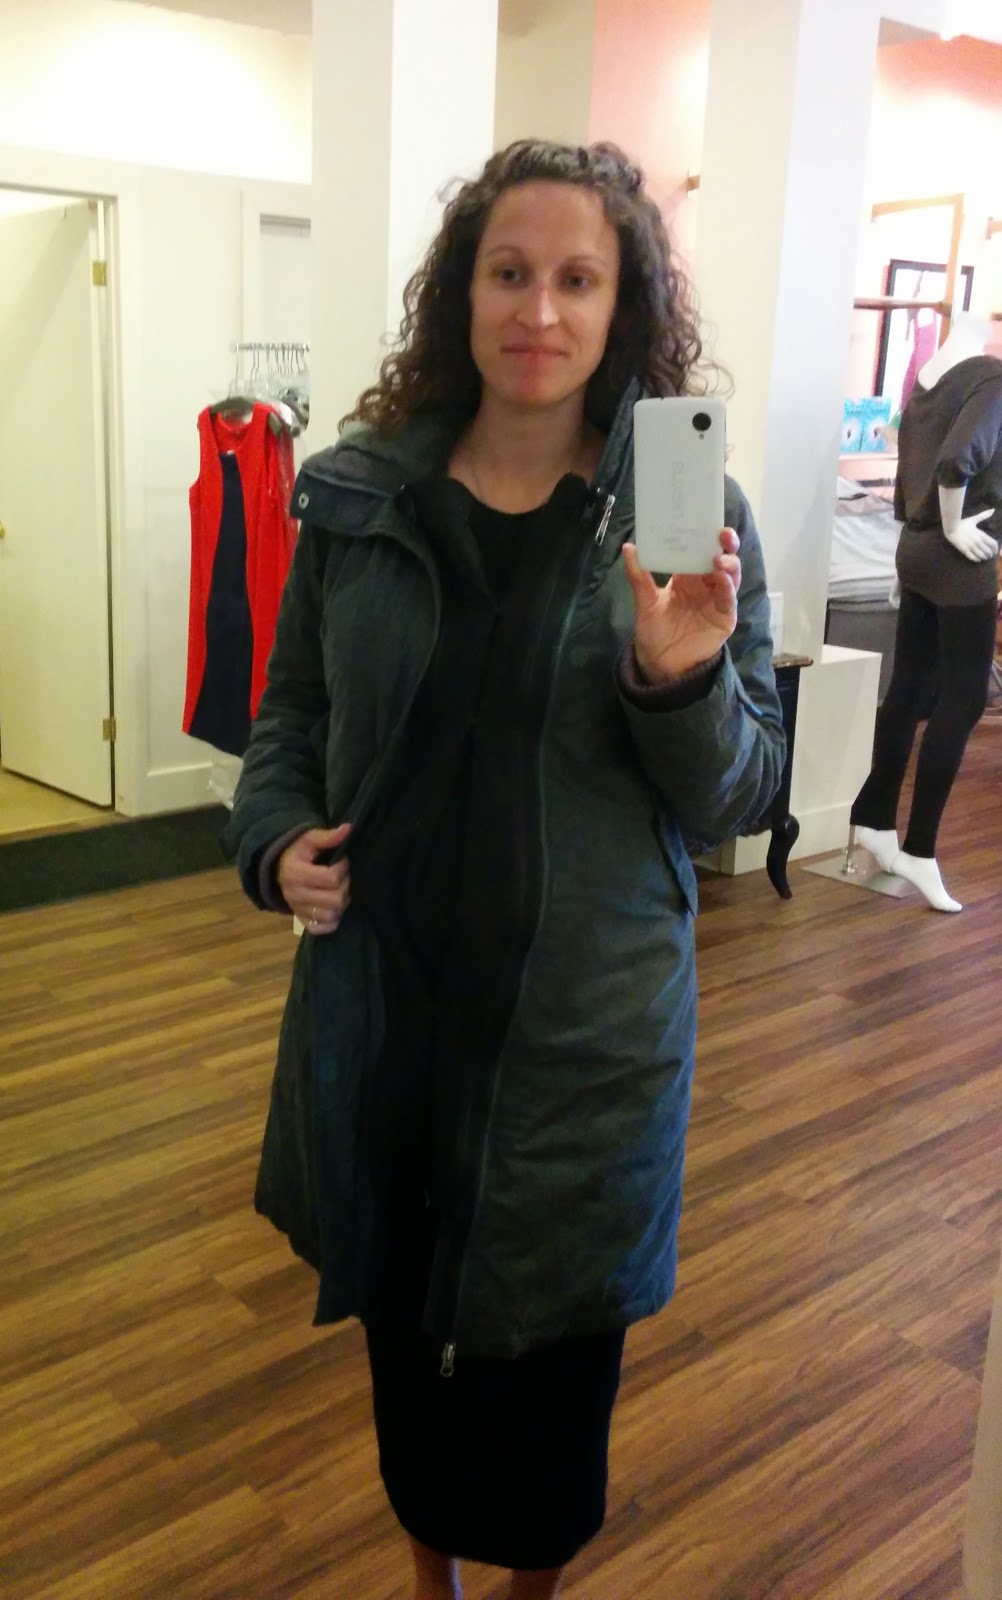 Canada Goose chilliwack parka outlet cheap - Lemon and Mint: Coat Extensions for Pregnancy and Babywearing